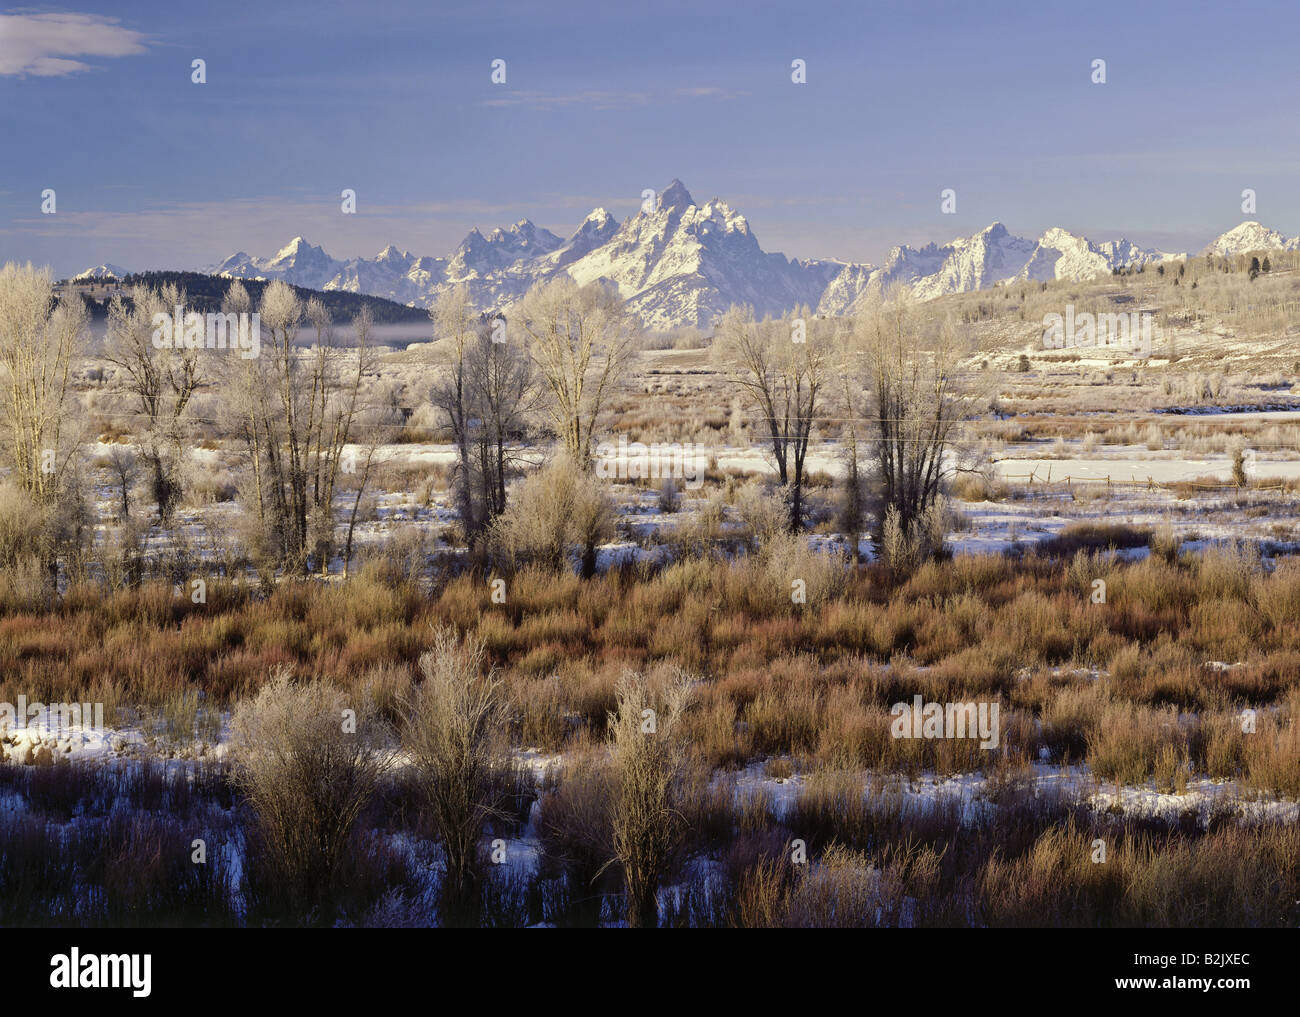 Geographie/Reisen, USA, Wyoming, Landschaften, Grand Teton National Park, Grand Teton Bergkette, Additional-Rights - Clearance-Info - Not-Available Stockfoto